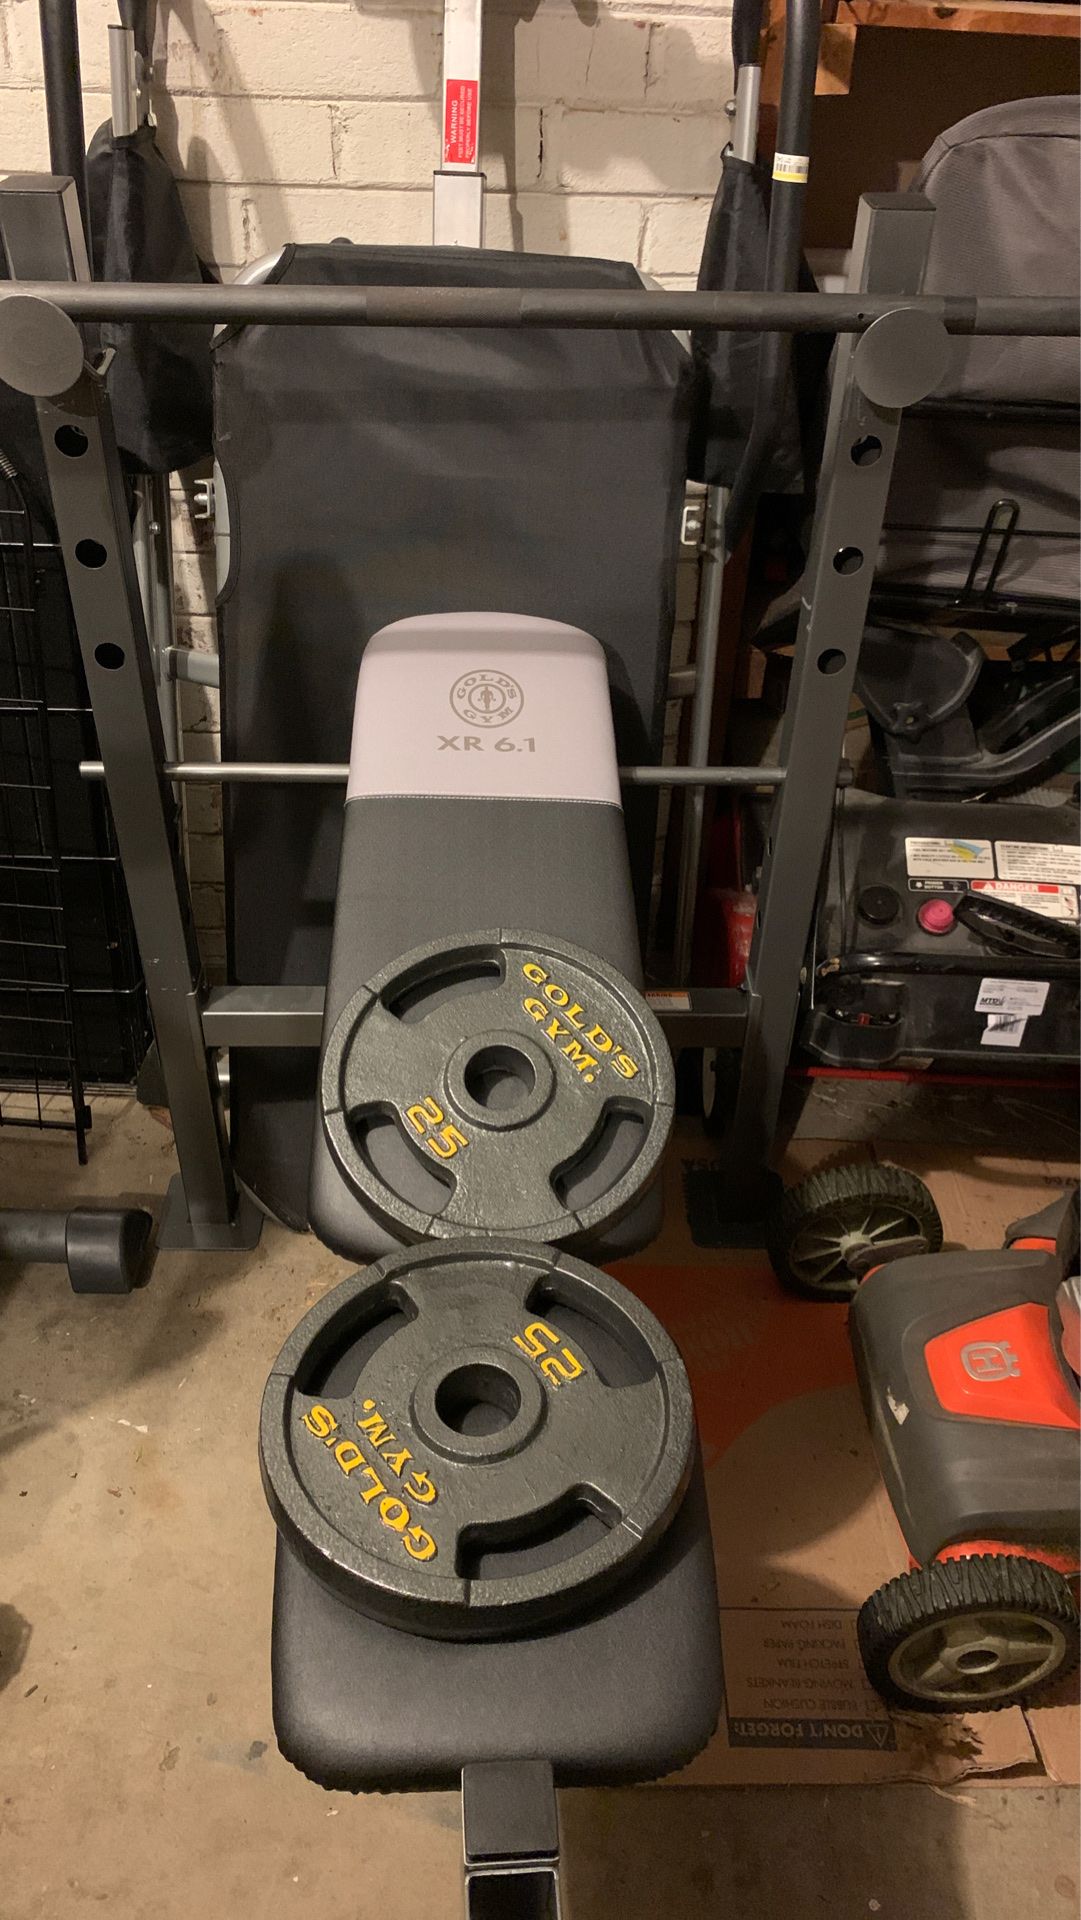 Gold's Gym XR 6.1 Weight Bench (Weight Bench) and Includes a 7' Olympic-style bar (3-piece assembly) and 2x 25-lb round, flat and cast iron plates